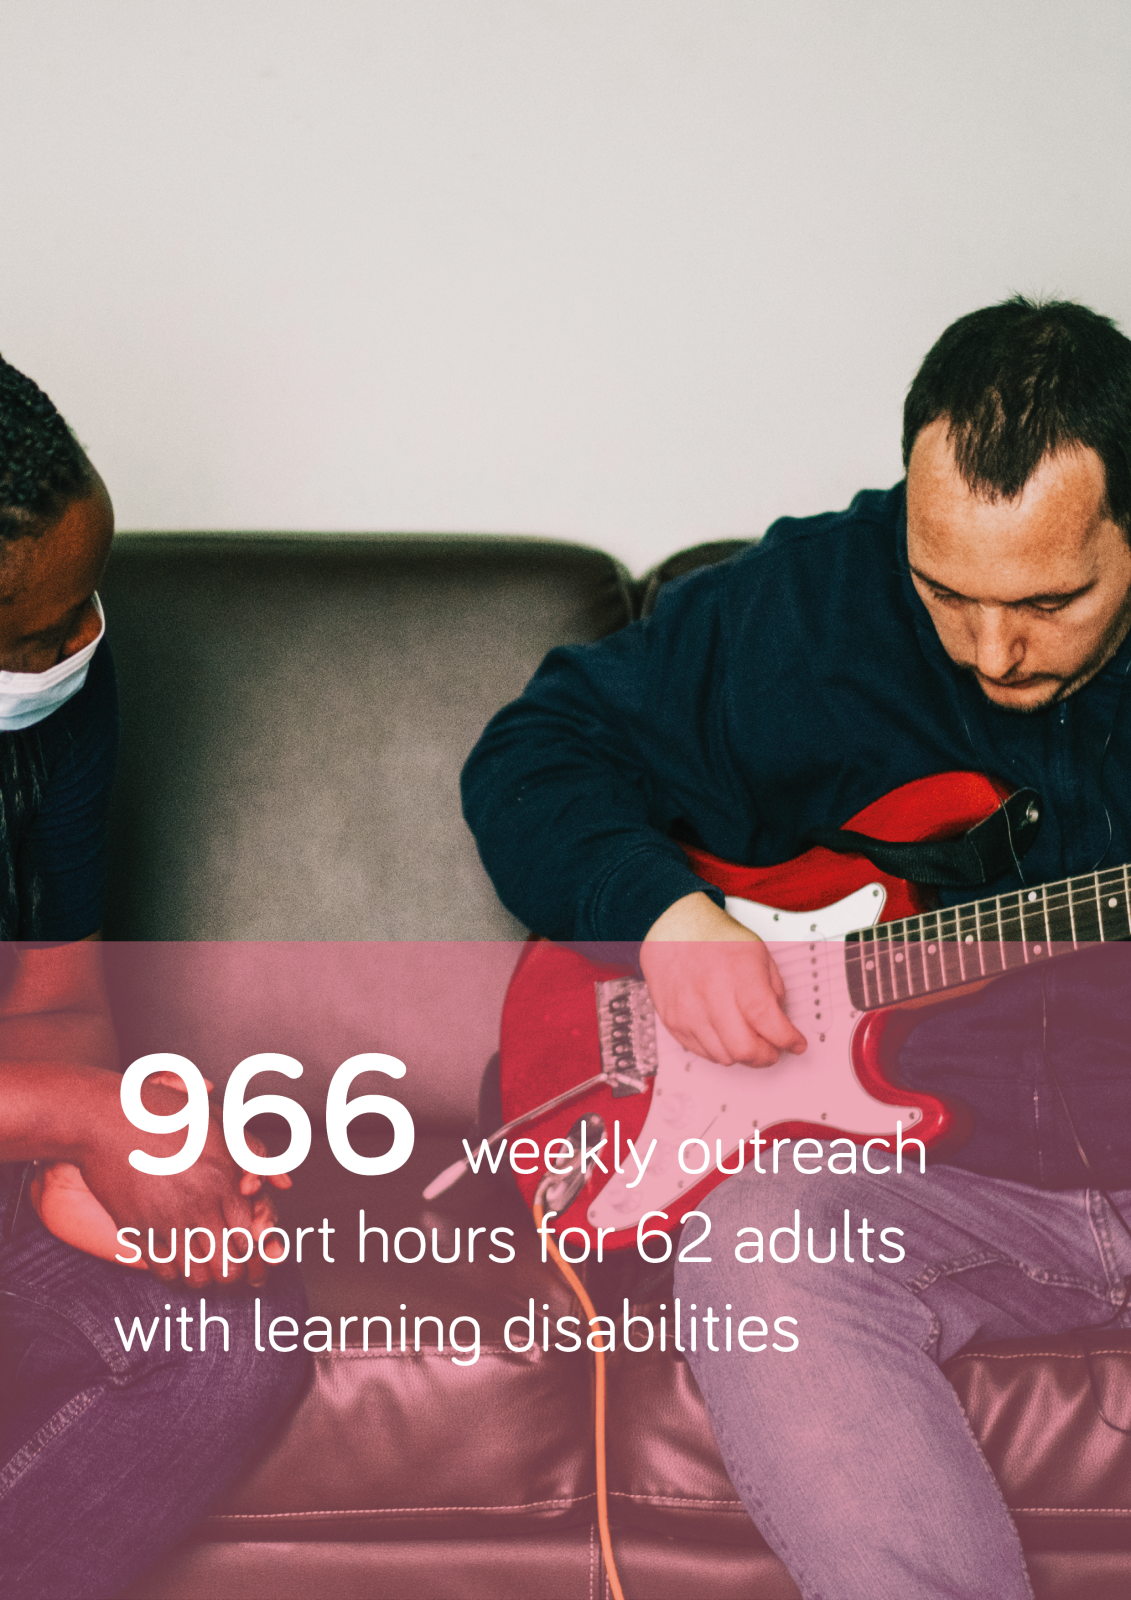 966 weekly outreach support hours